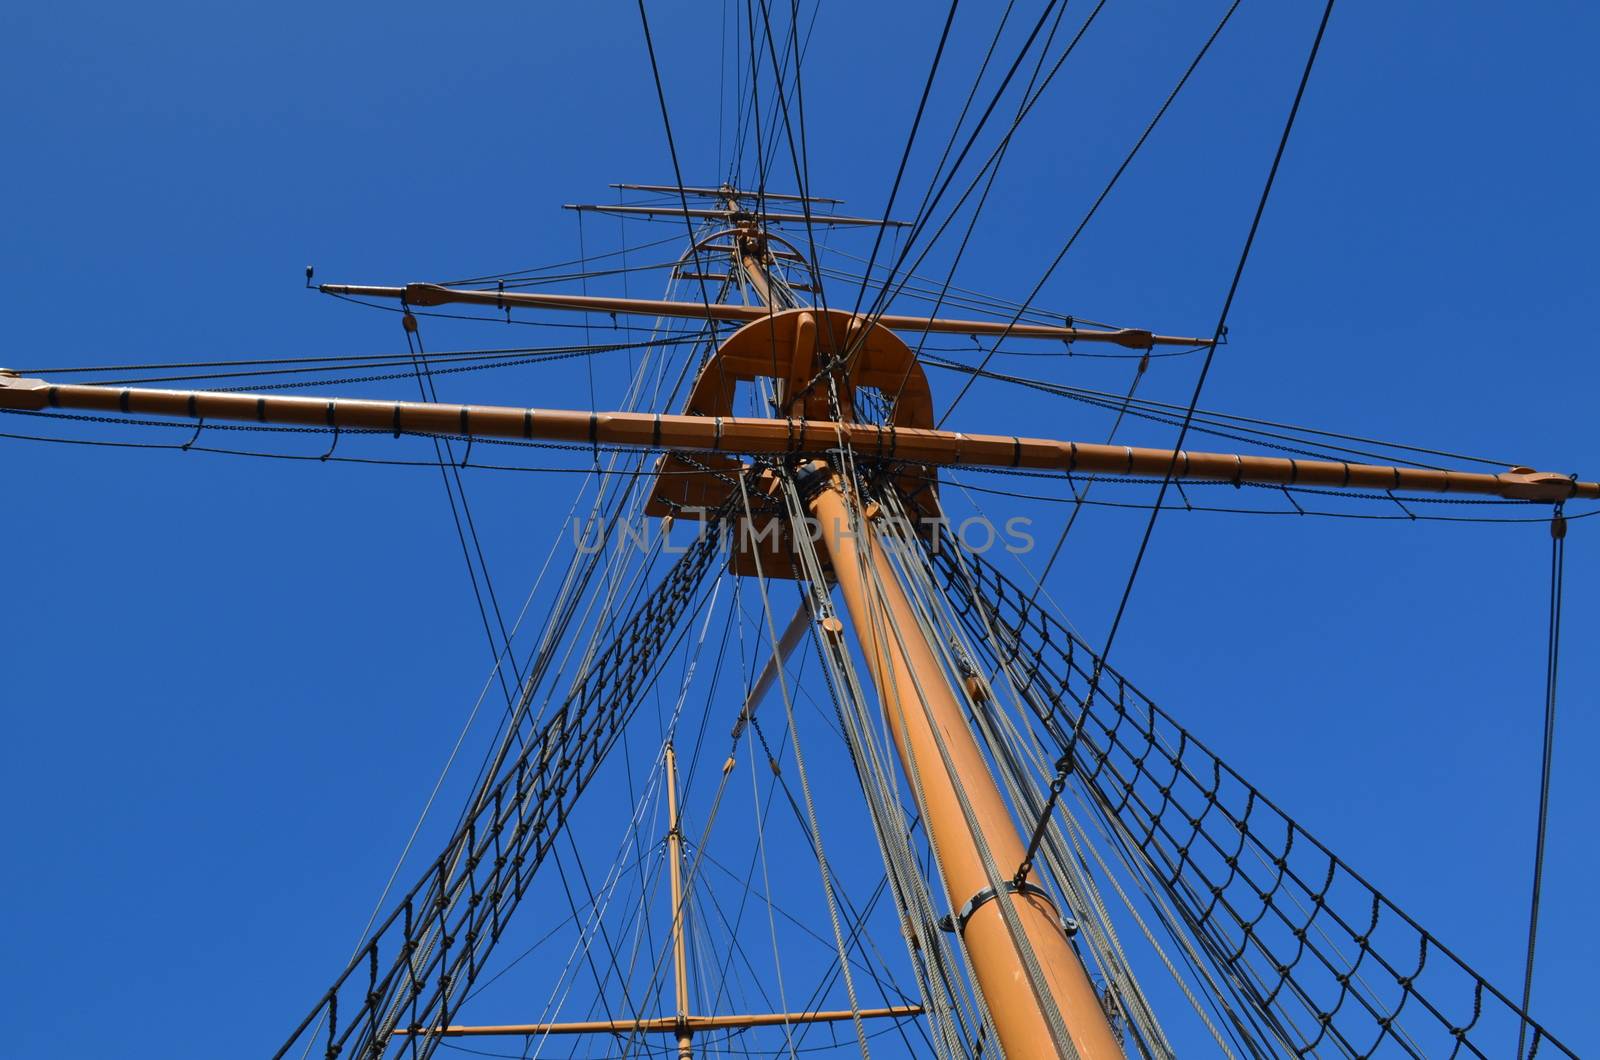 A large wooden mast on a British sloop ship.